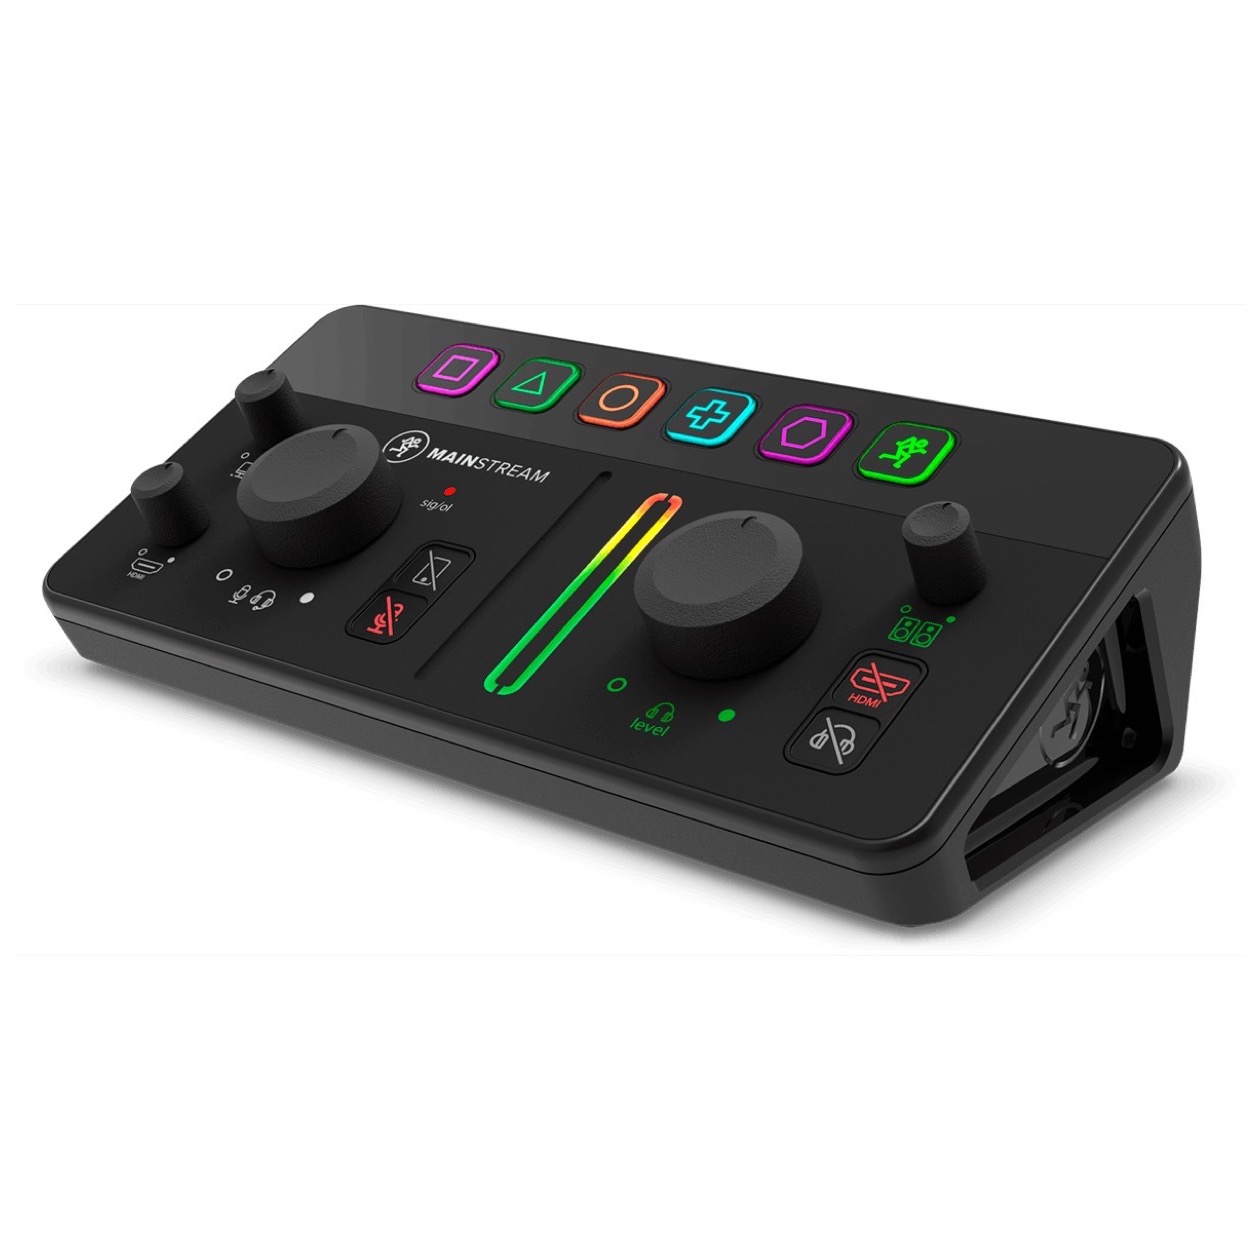 Mackie Mainstream Complete live streaming and video capture interface with Mackie MainStream programmable control keys